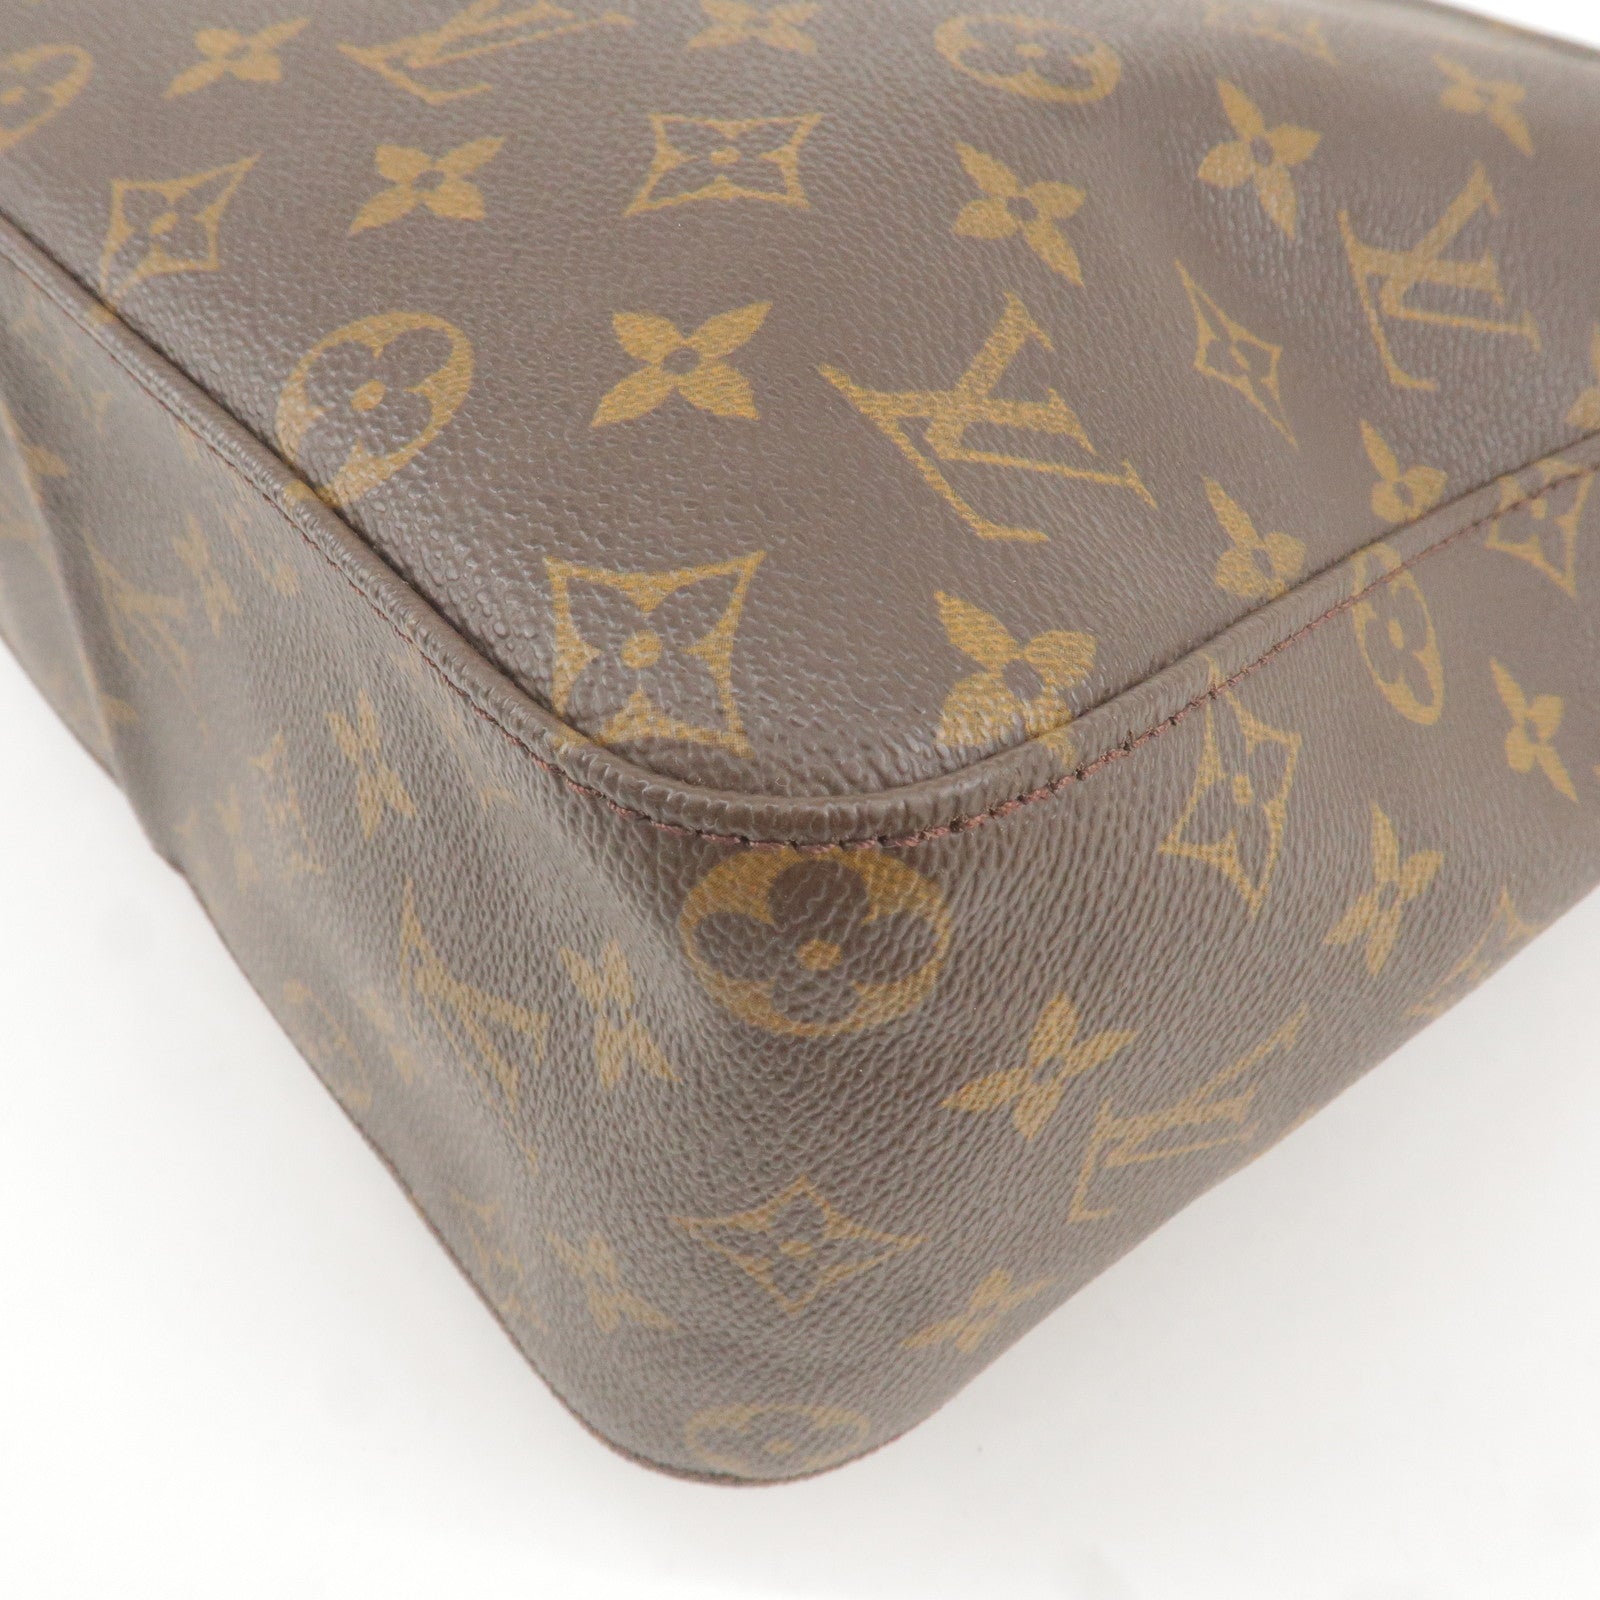 LOUIS VUITTON shoulder bag STRESA PM MONOGRAM, collection 2010. —  Discover Rare and Captivating Sold Pieces, Find Your Collectibles